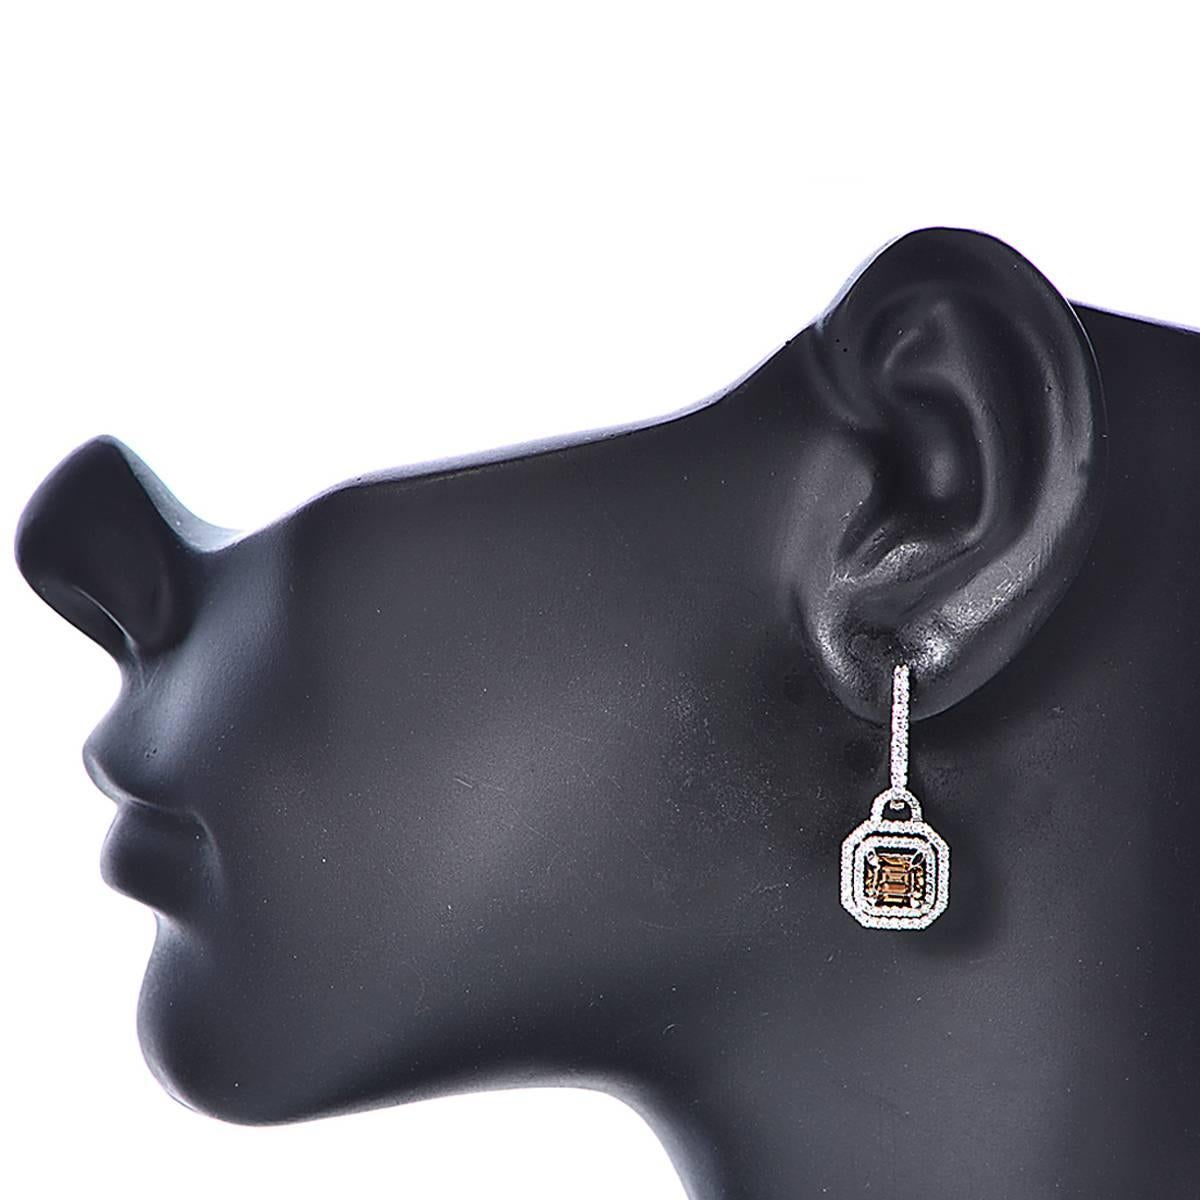 18 Karat White Gold Earrings Set with 2 Fancy Intense Brown Emerald Cut Diamonds with an Approximate Total Weight of 2.08b Carats with 146 Round Brilliant Cut Diamonds with an Approximate Total Weight of .92 Carats, G Color, VS Clarity. Total